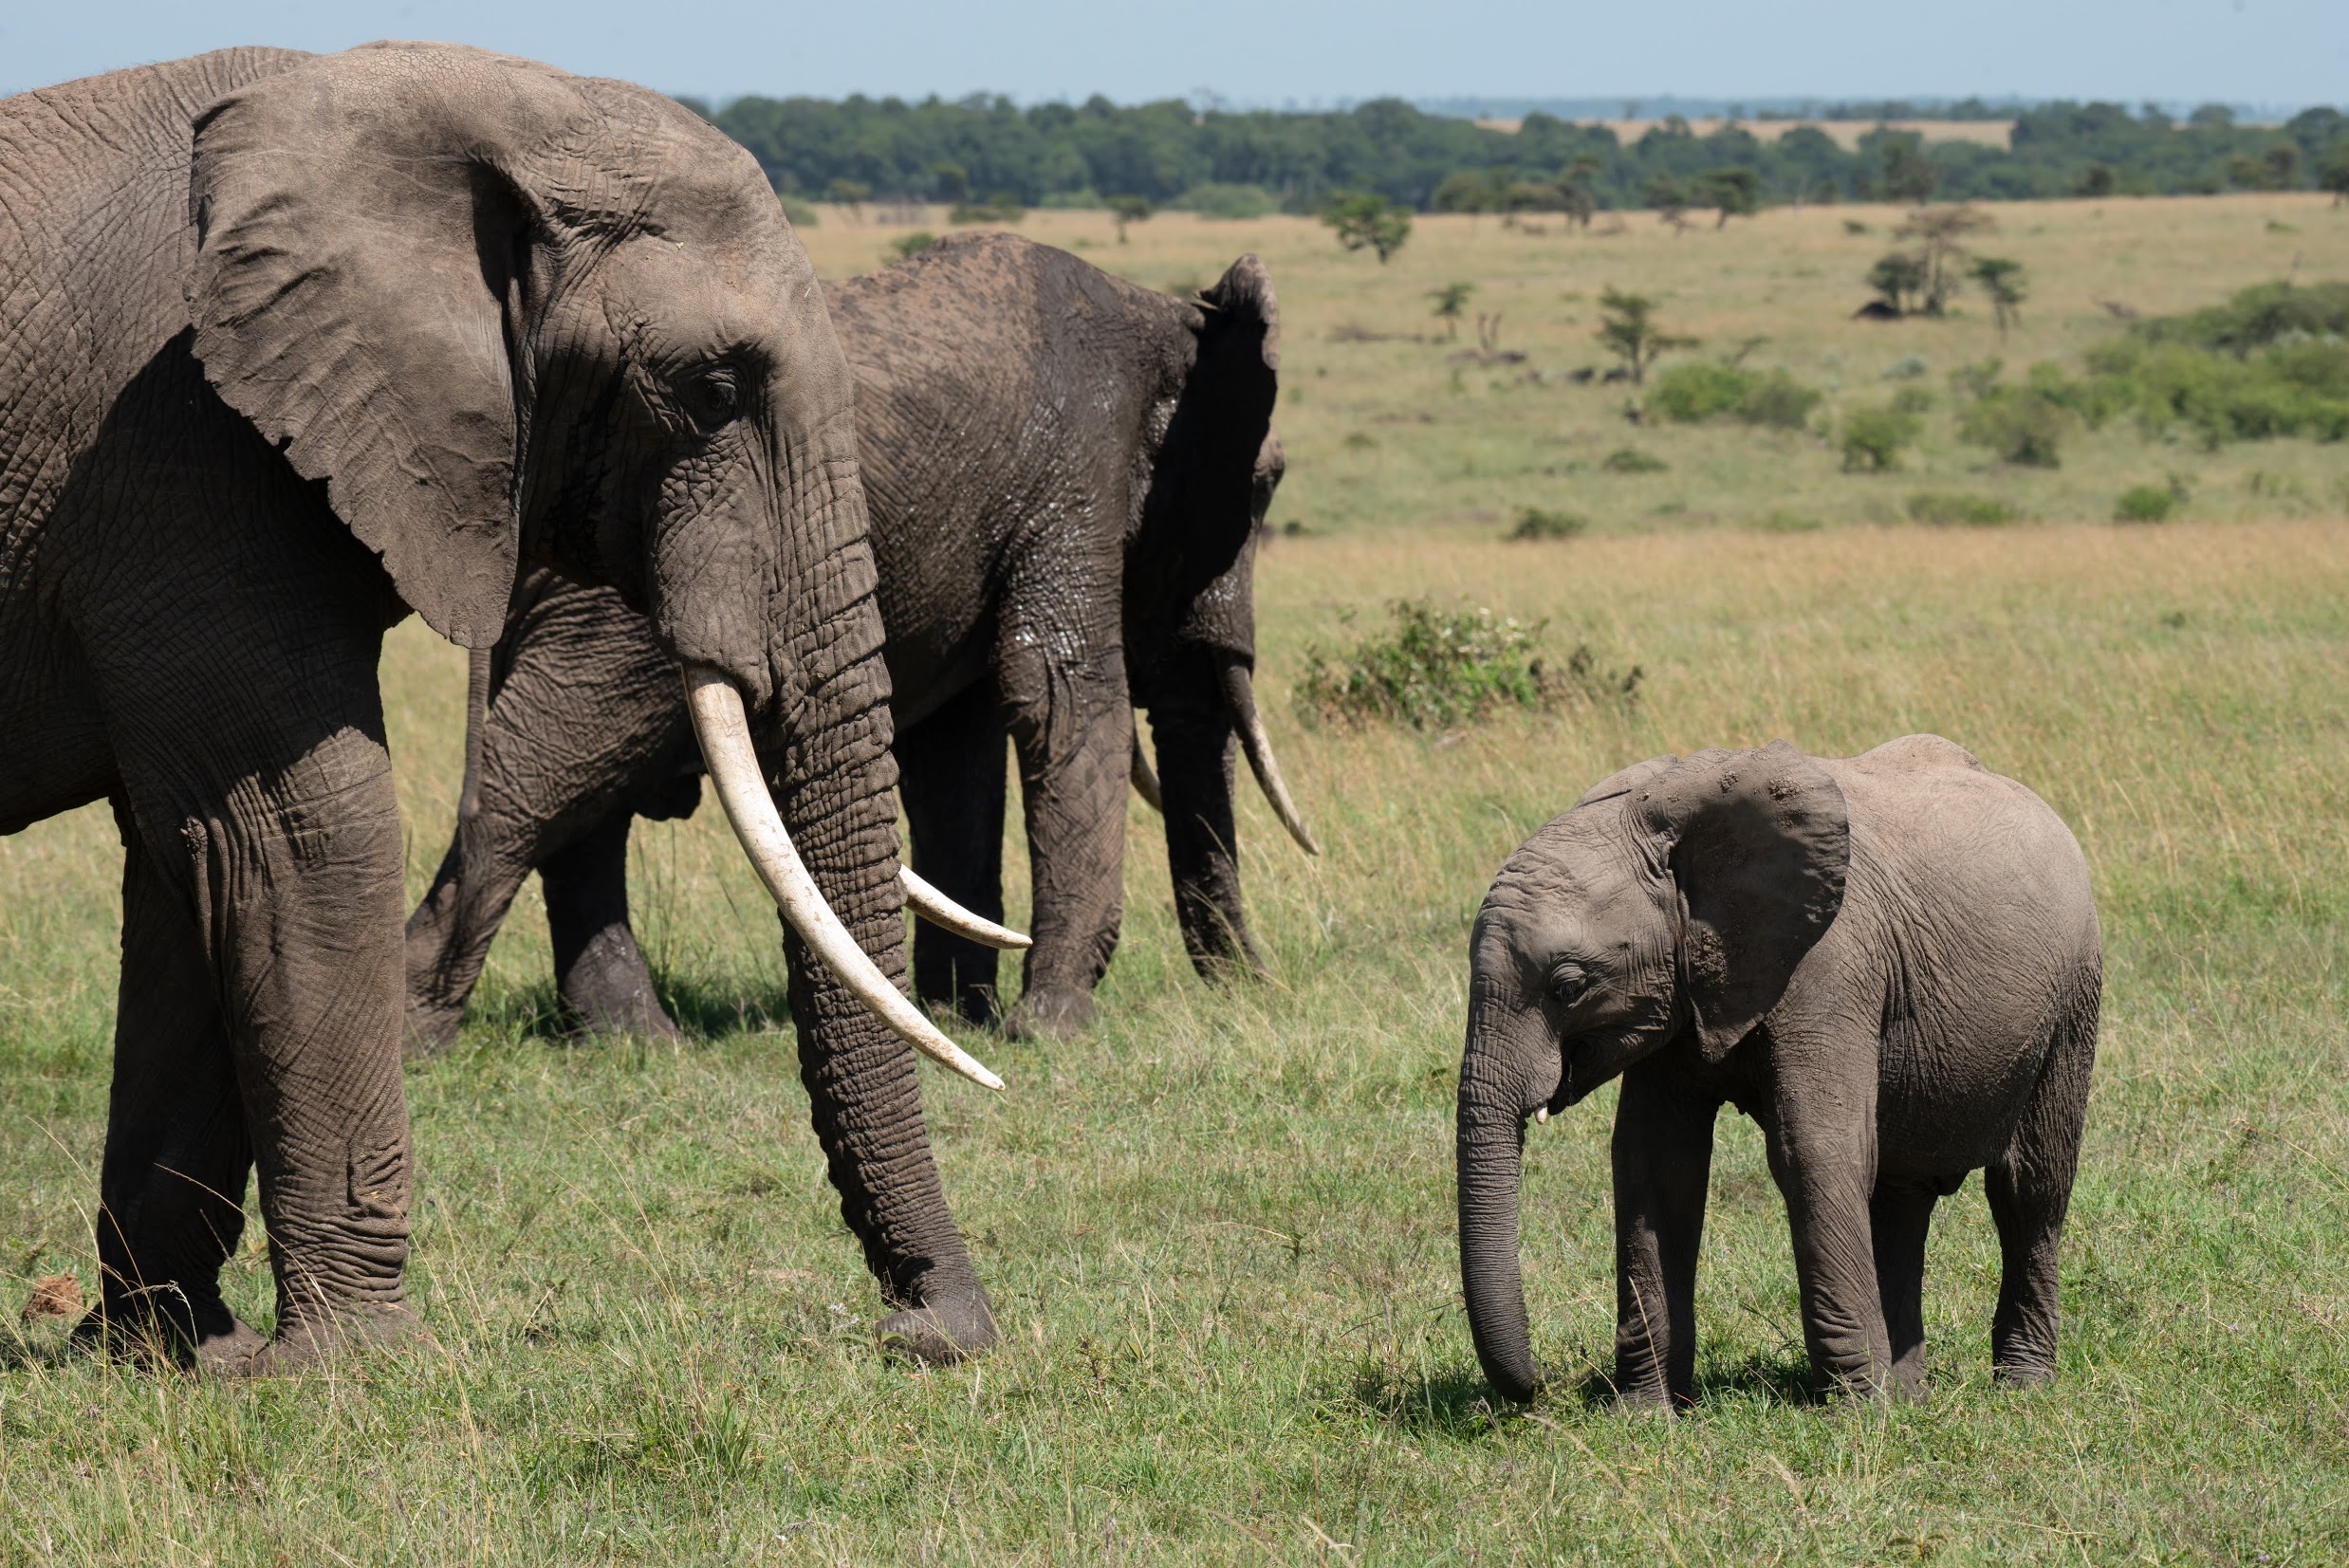 A baby elephant and two adults on the plains